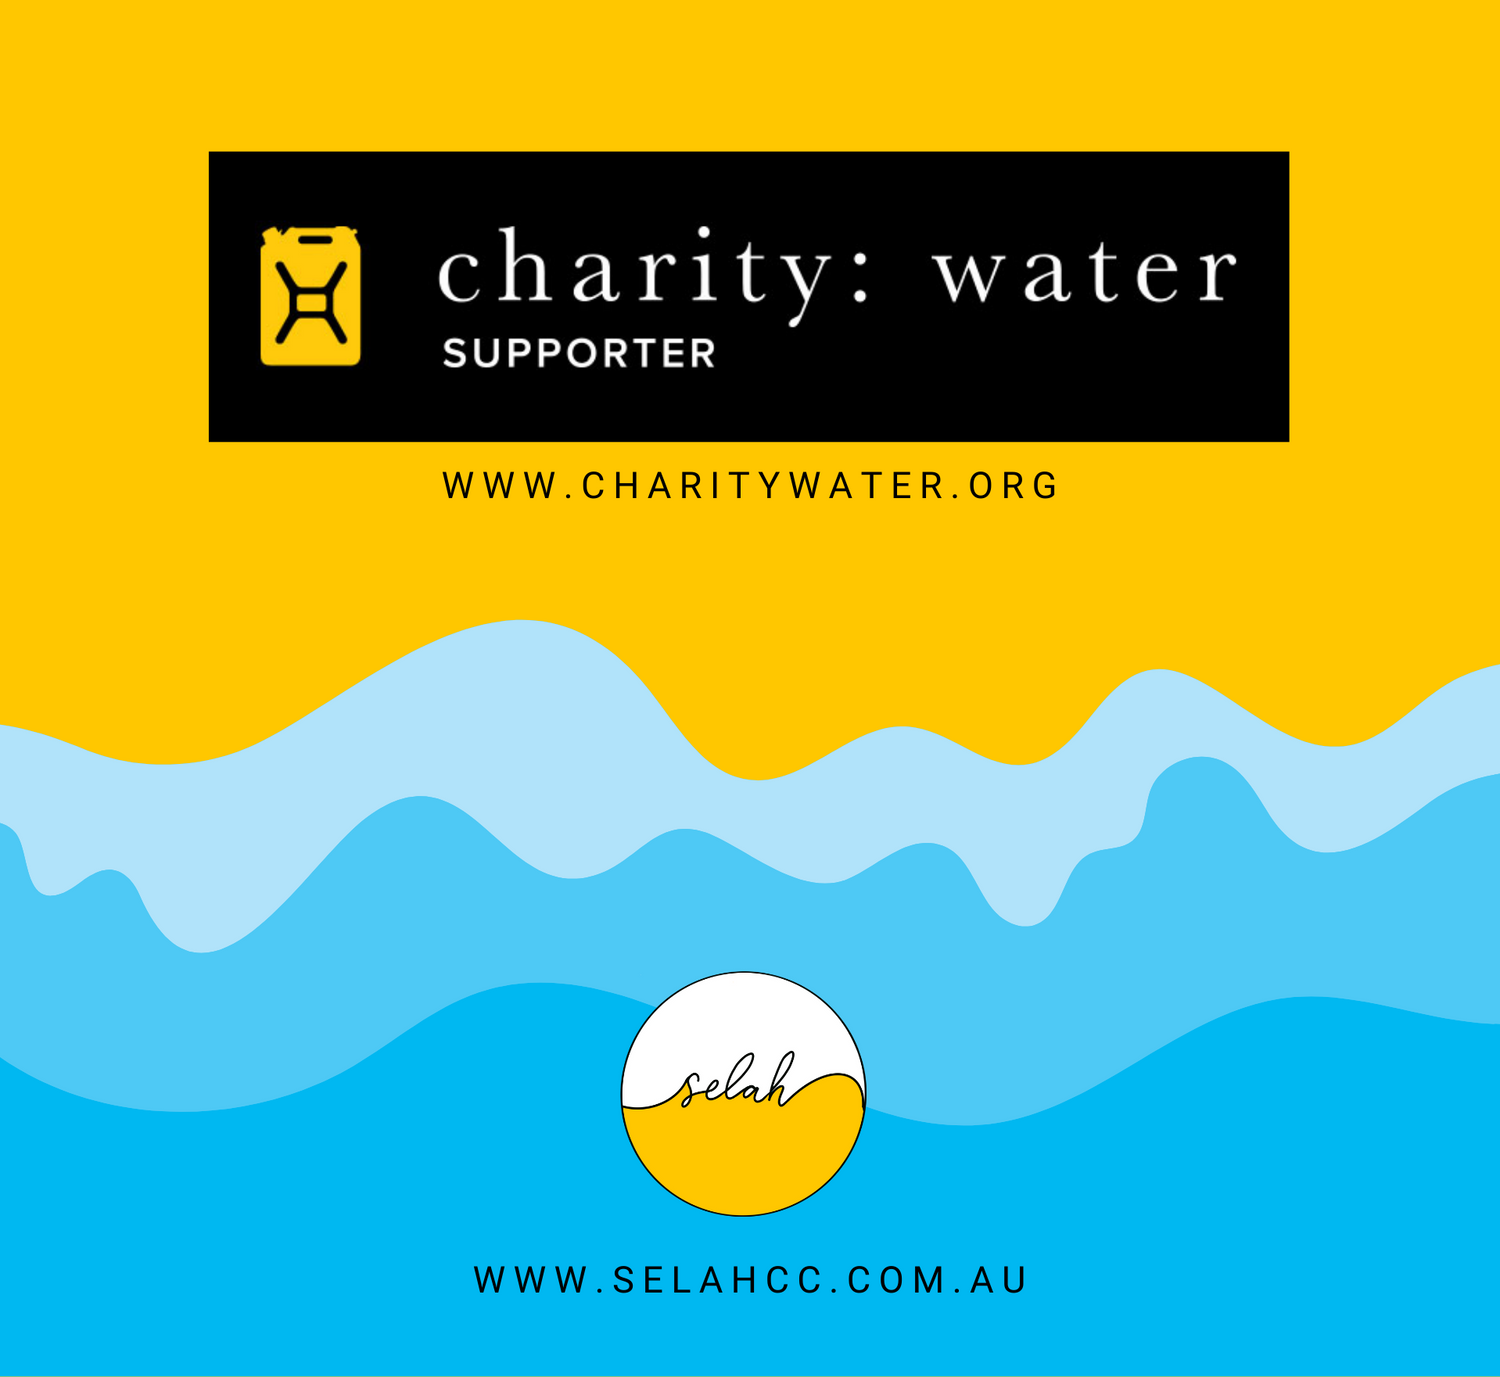 Charity: Water Partner. Social Enterprise and Charity based business